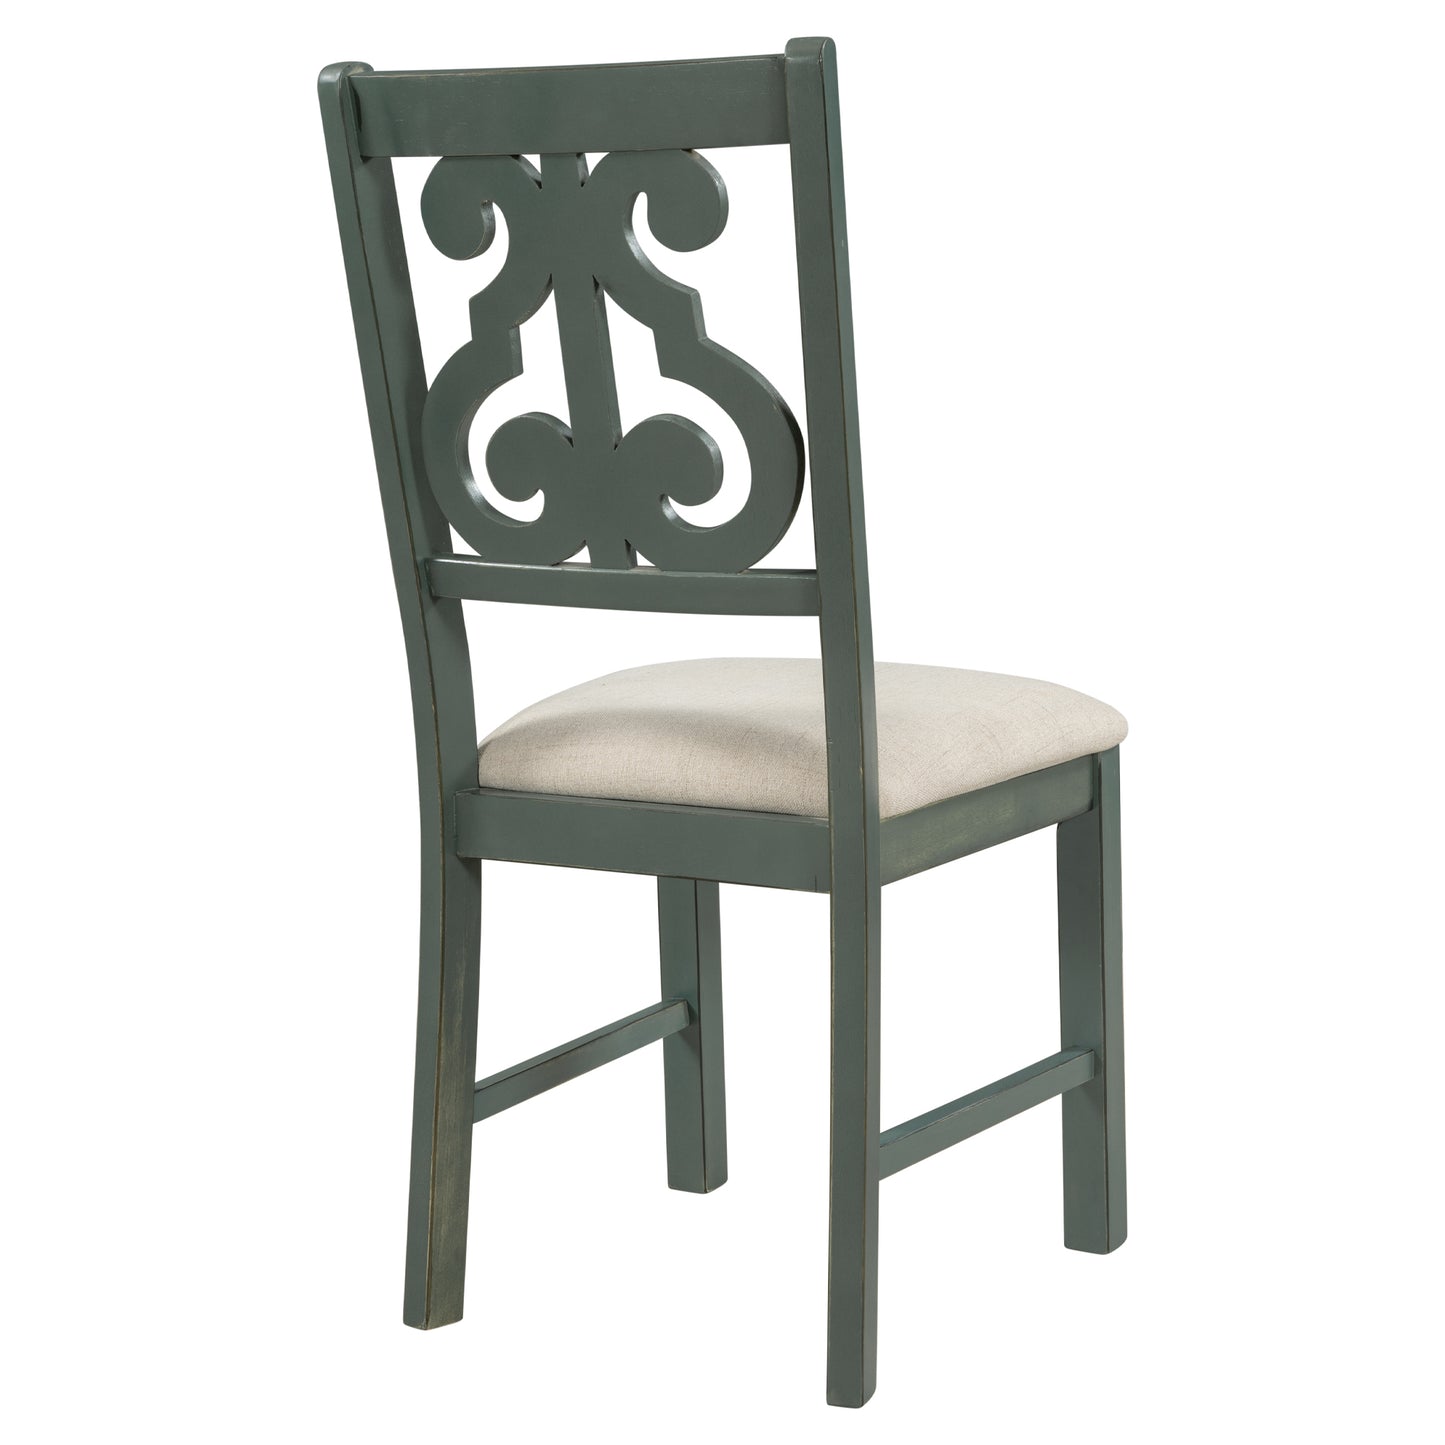 Teal TREXM 5-Piece Round Table & Chairs Set